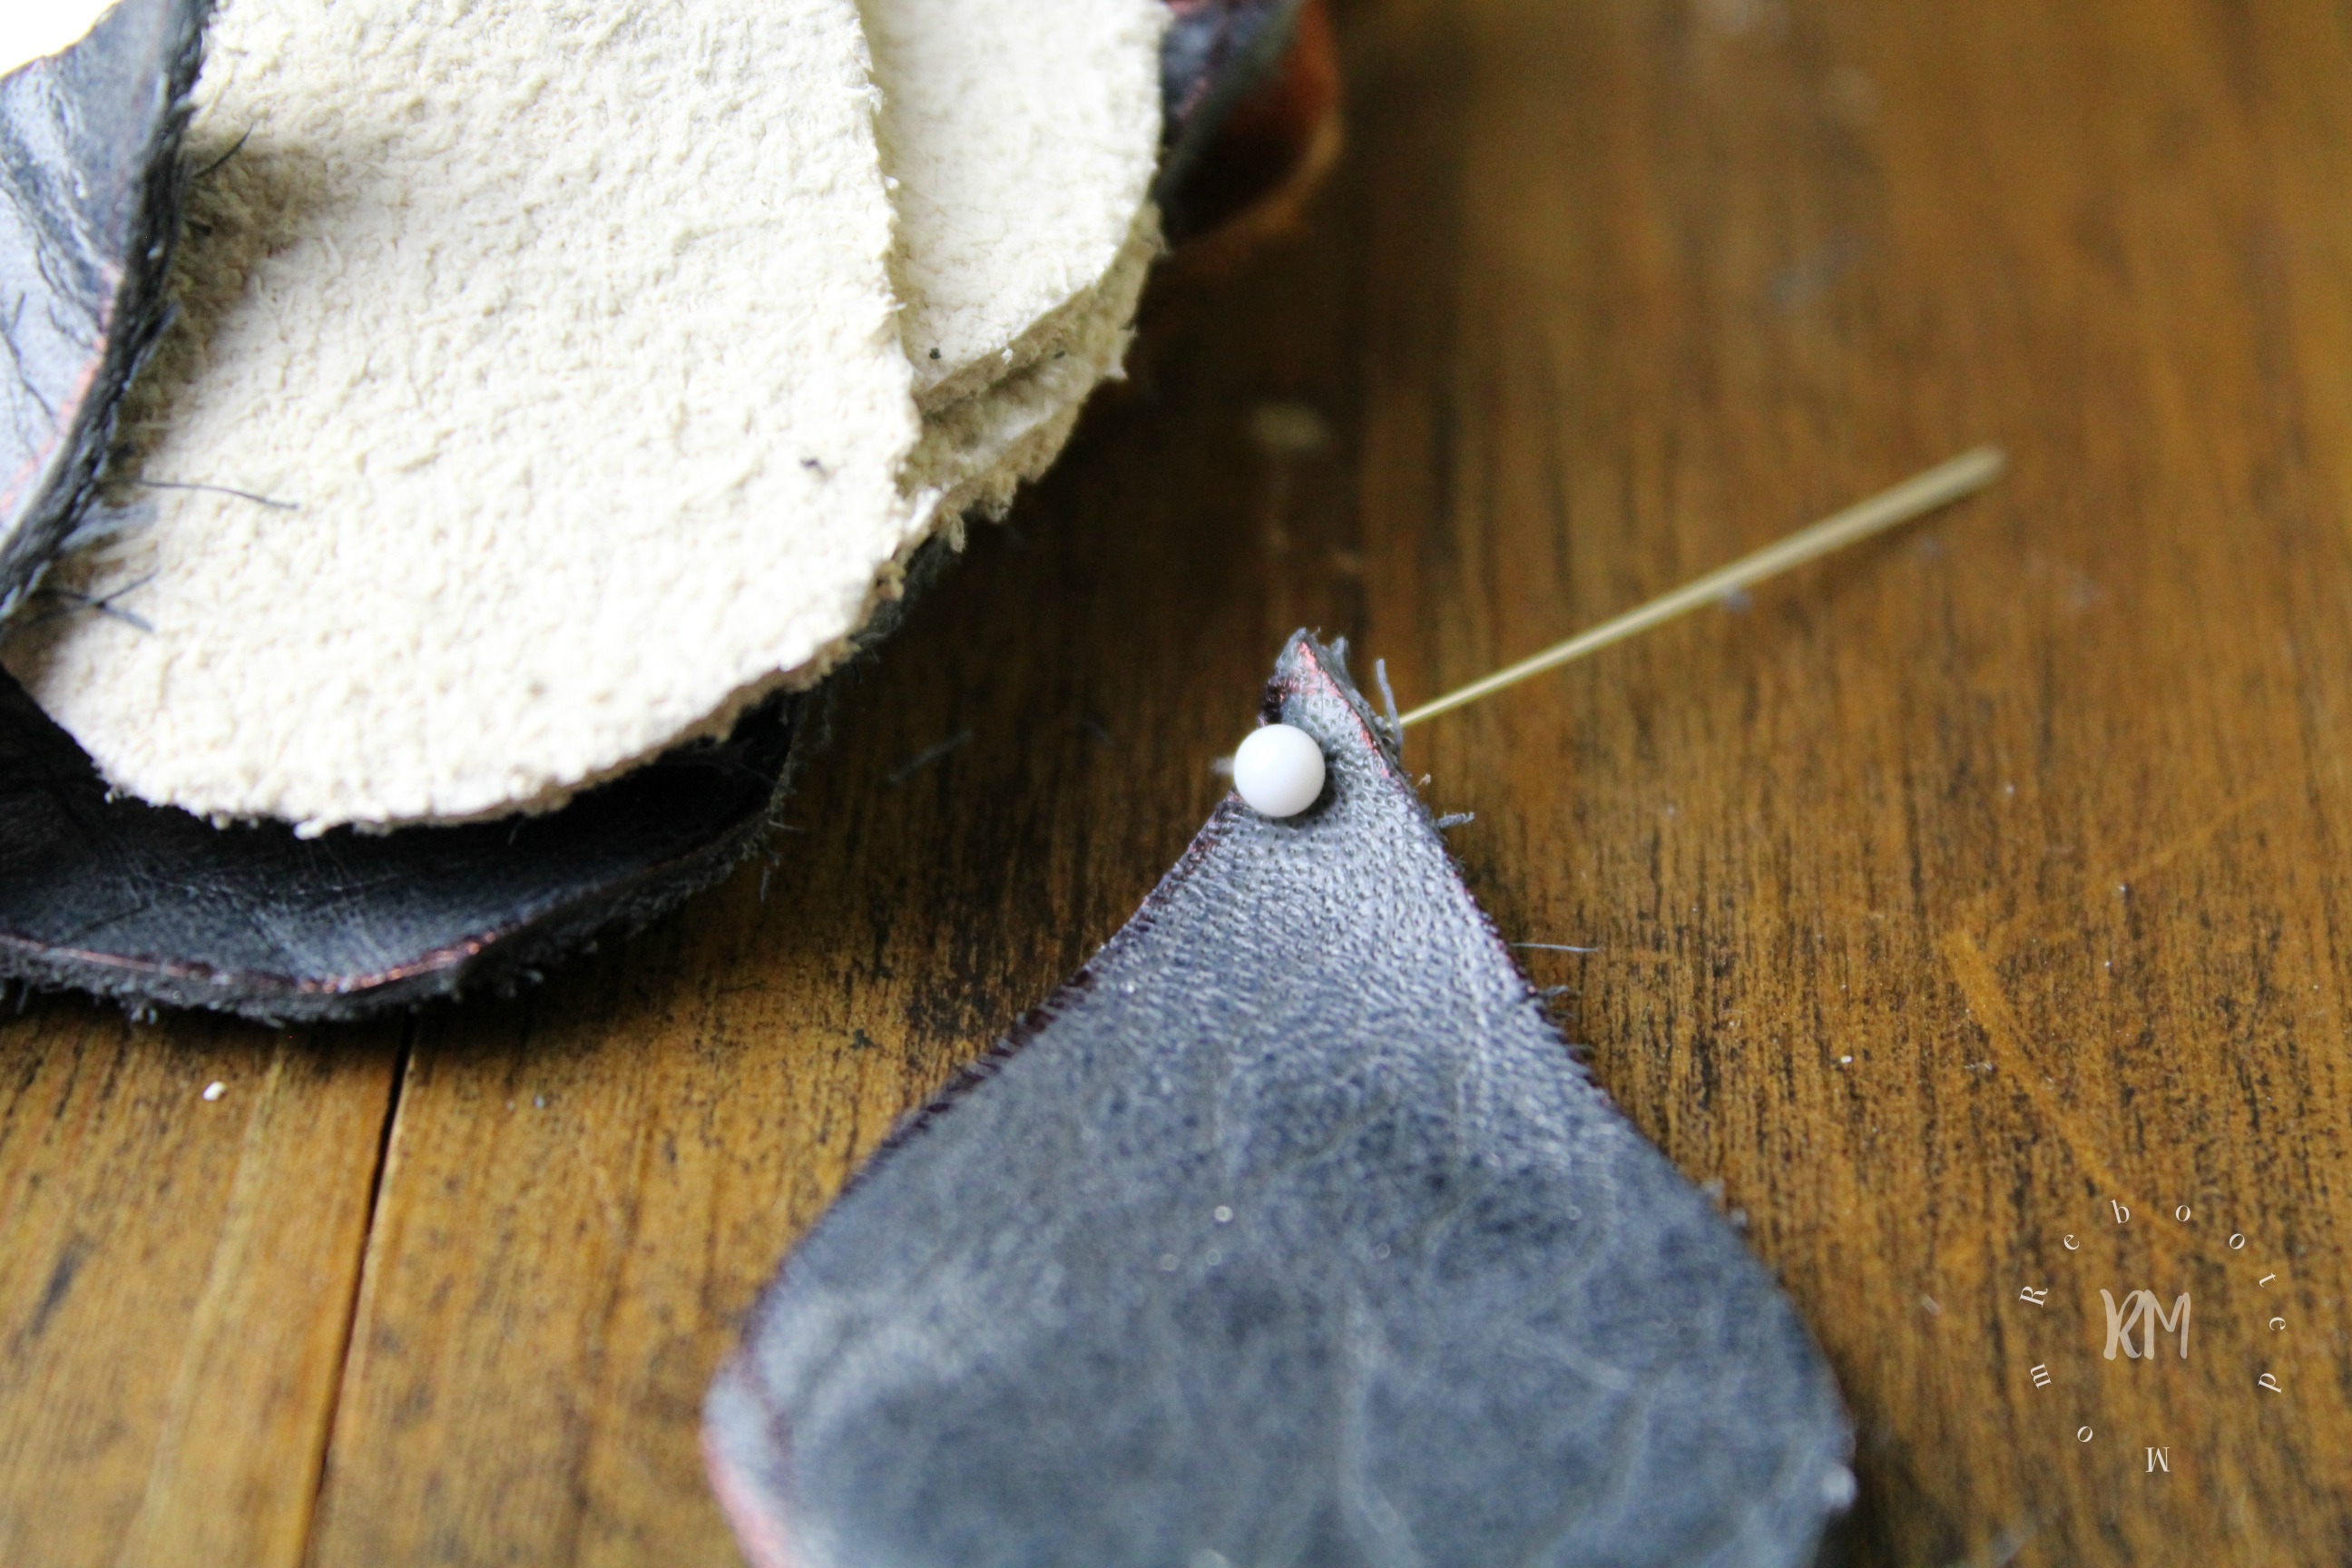 Make the coolest leather earrings with this simple DIY, leather scraps, and a simple tear drop shape file. This is an easy DIY that takes mere minutes!